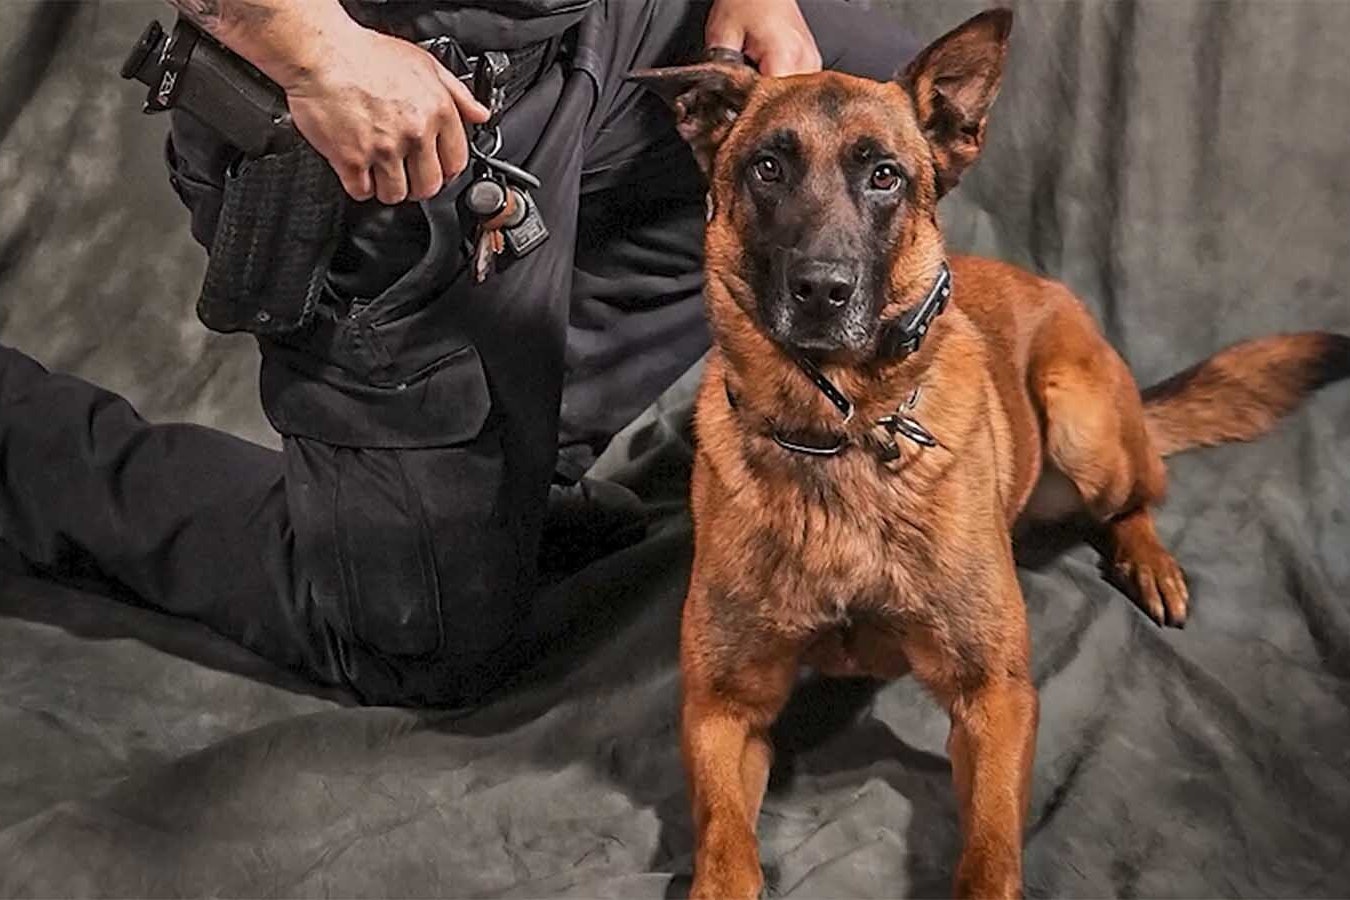 Bilko, an 8-year-old Belgian Malinois was a rock star K-9 officer for the Gillette Police Department before his recent retirement.